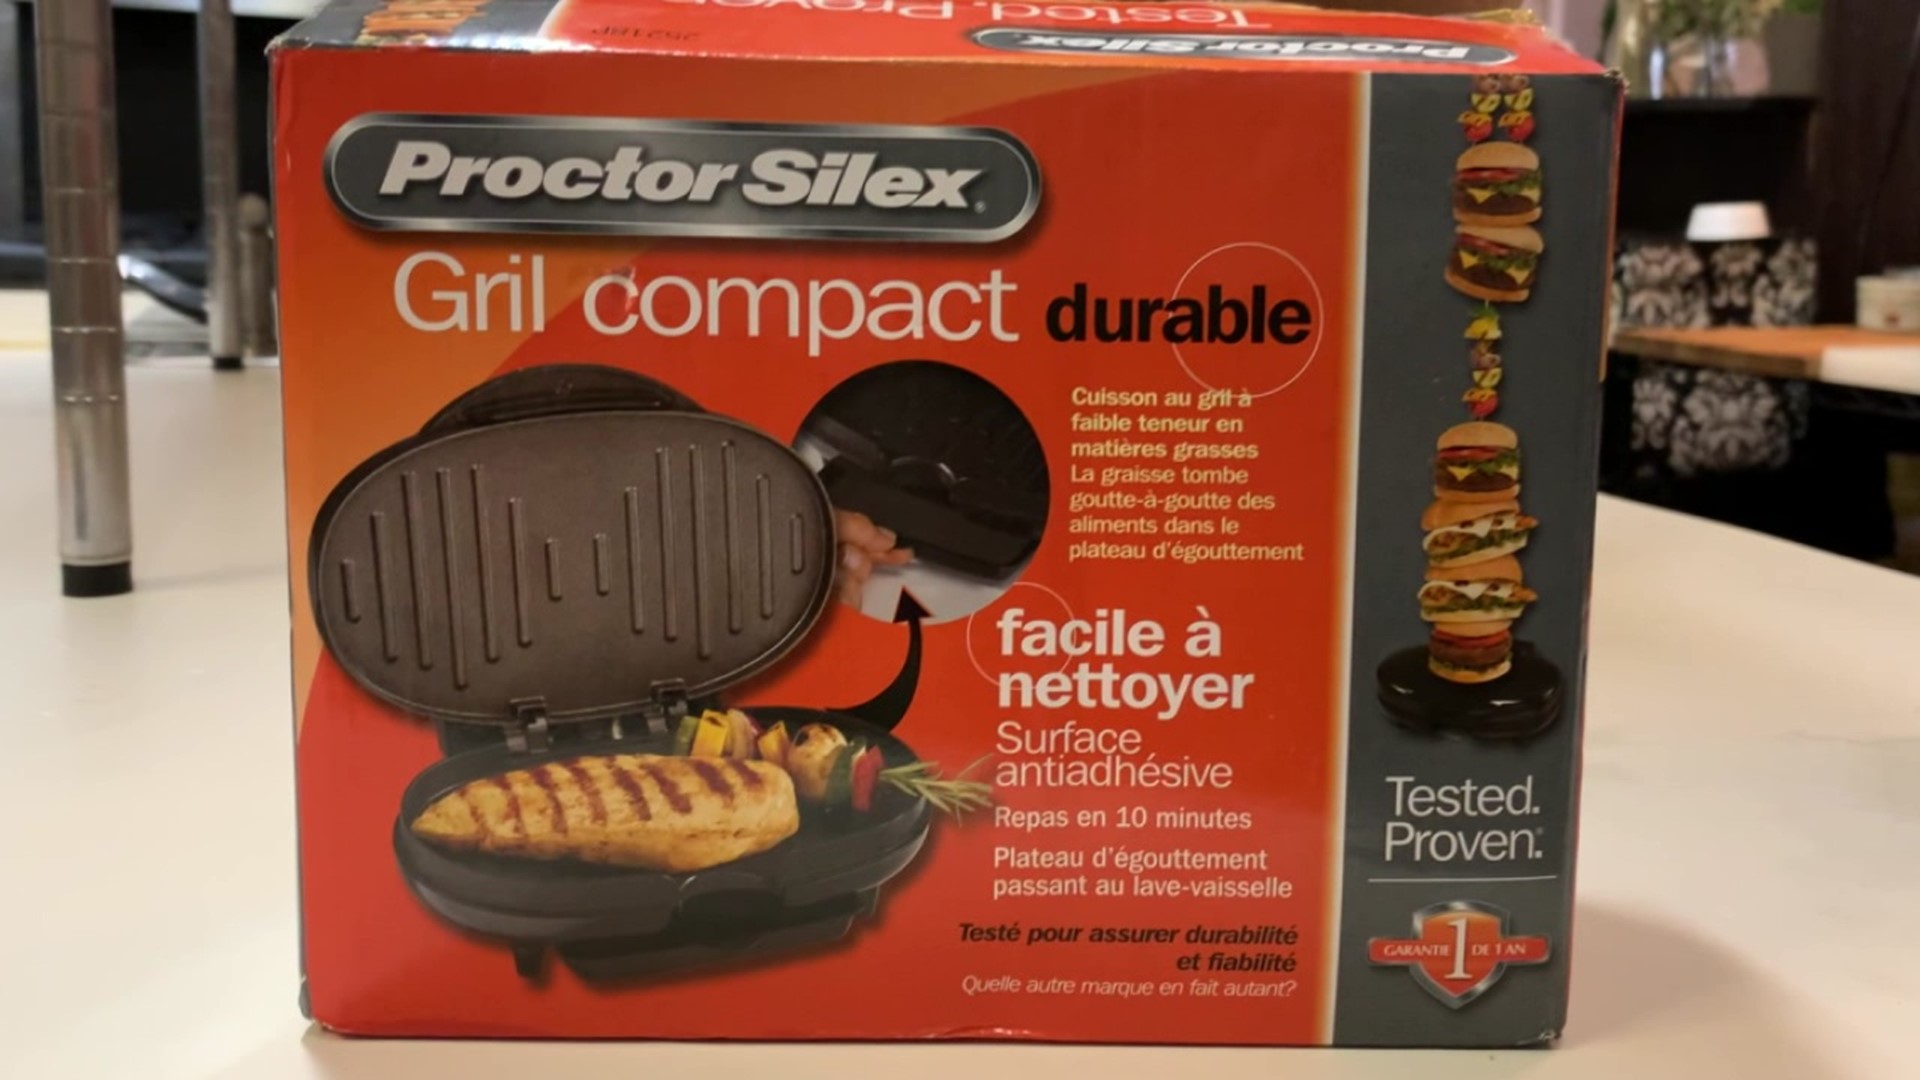 Proctor Silex claims that the grill will cook most food in less than 10 minutes.